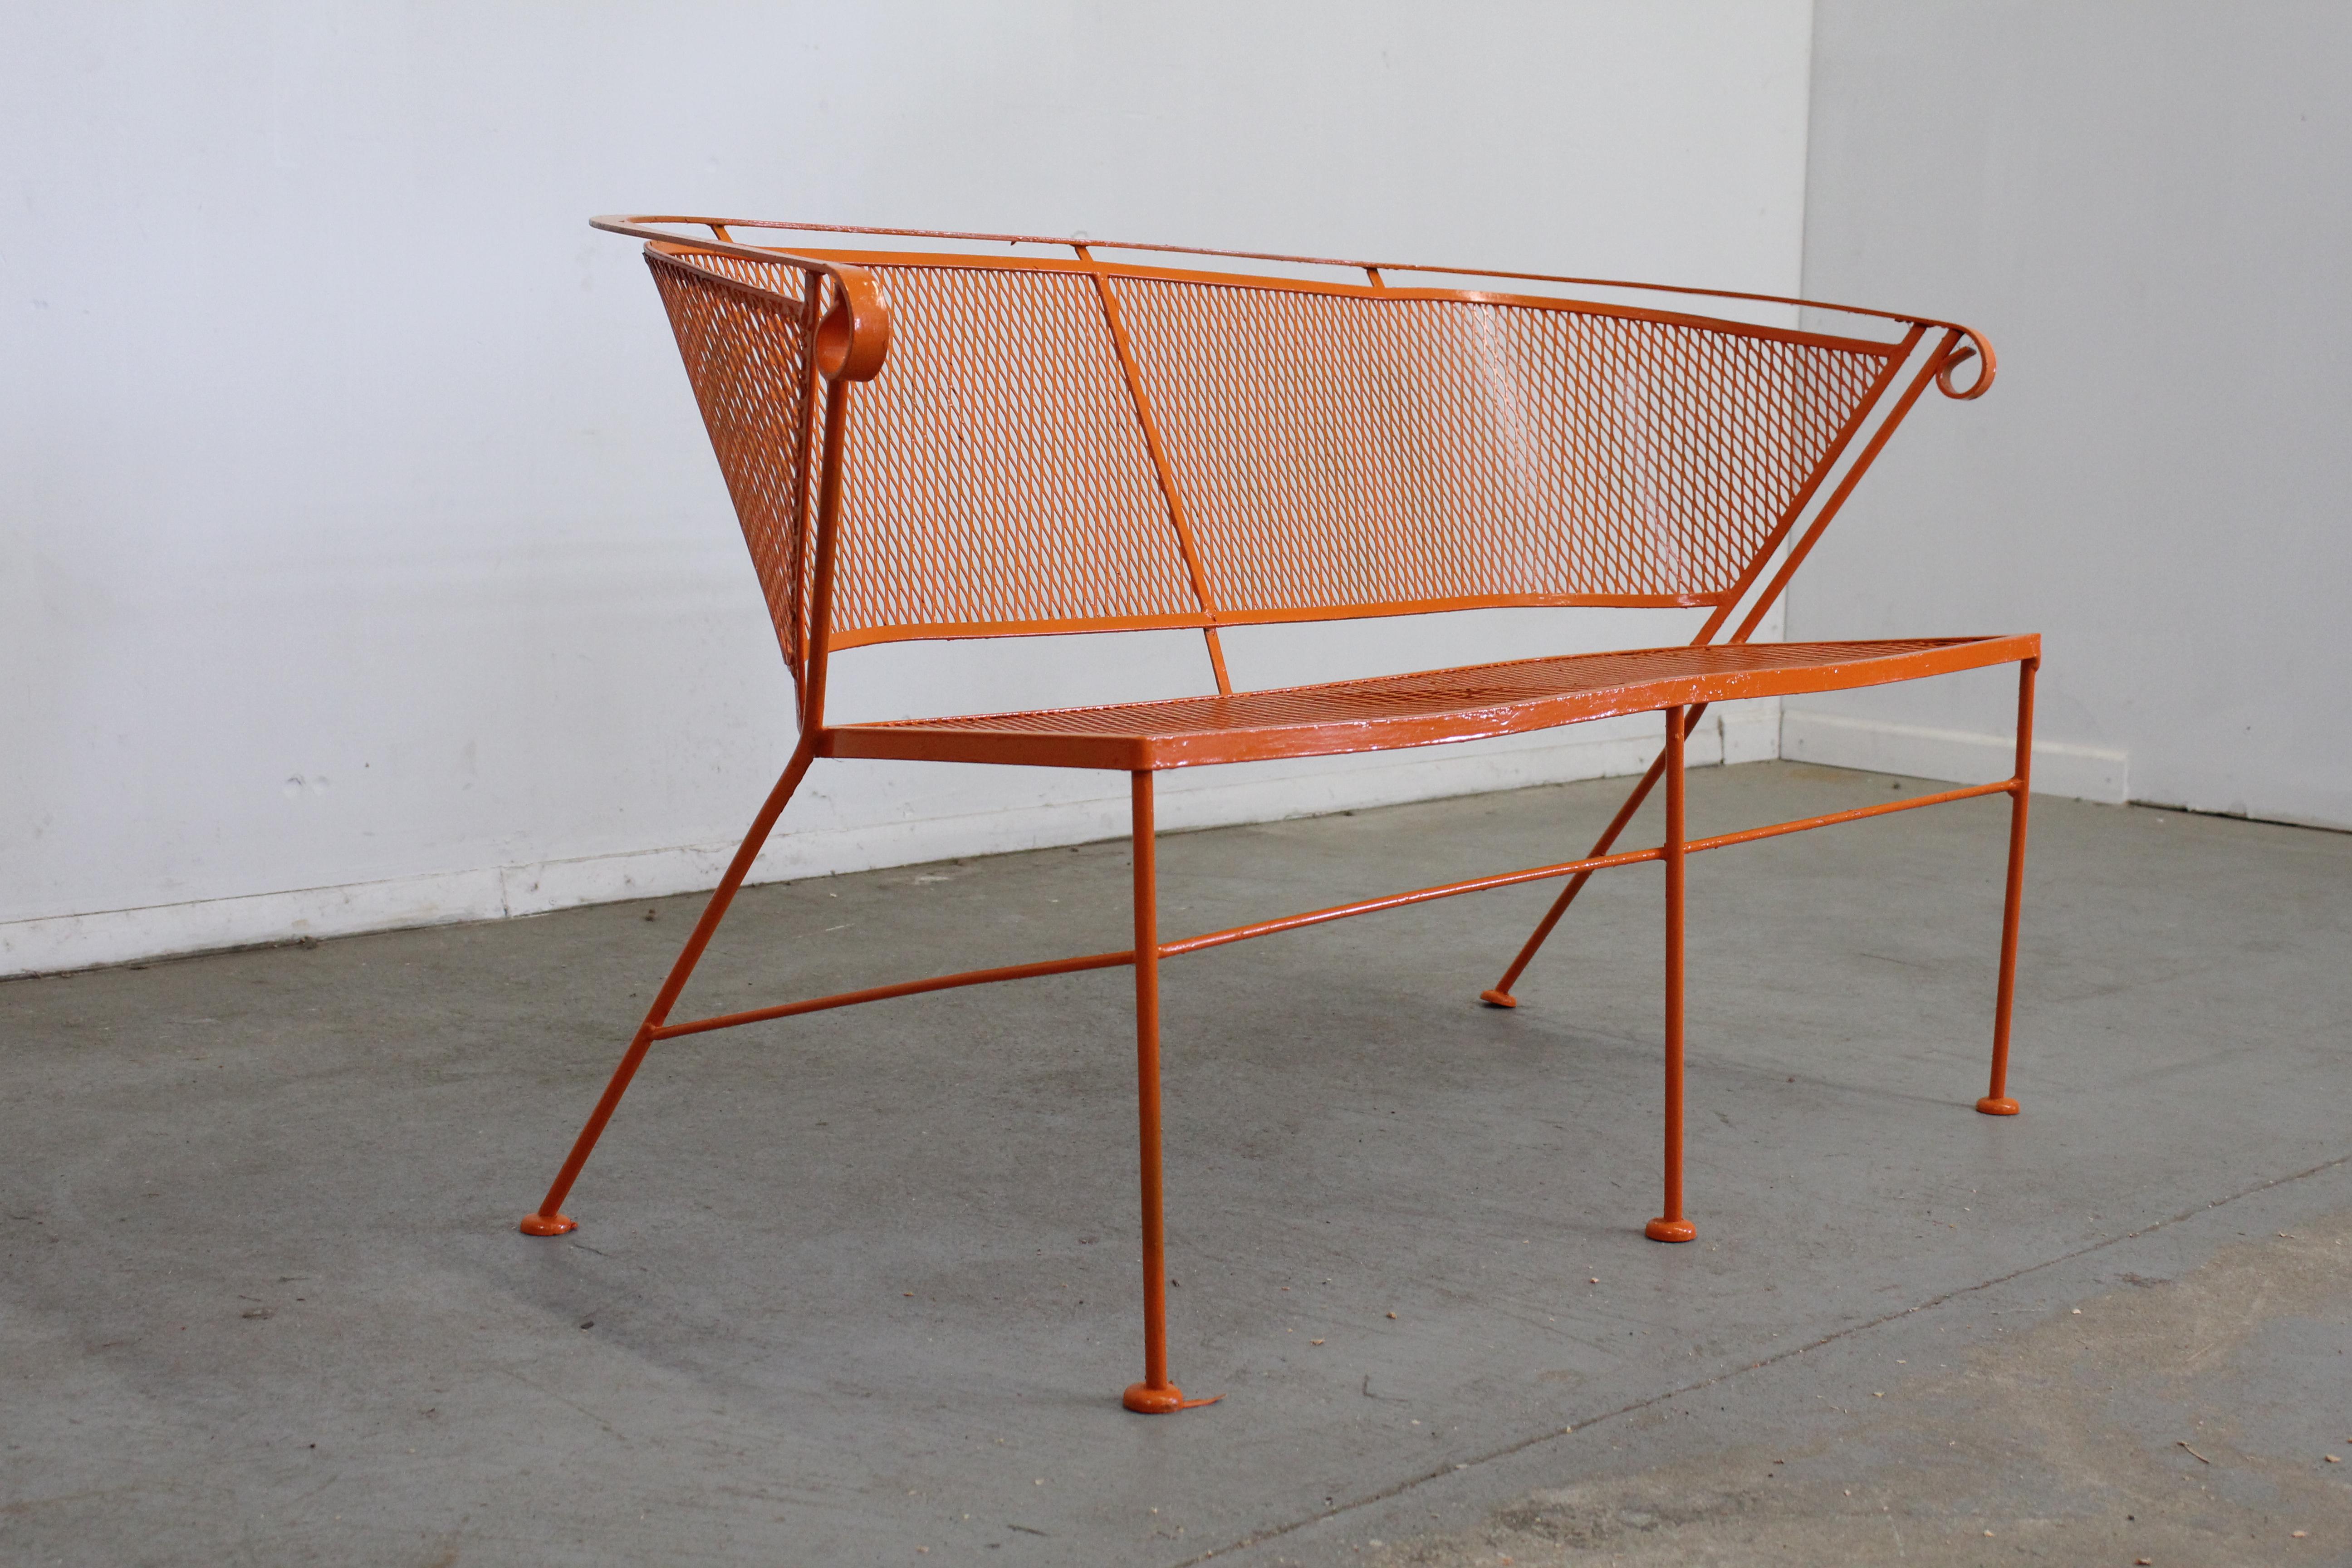 Mid-Century Modern atomic orange outdoor metal curved back bench

Offered is a Mid-Century Modern atomic orange outdoor metal curved back bench, circa 1968. This bench has been repainted in an atomic orange. It is in good condition considering the